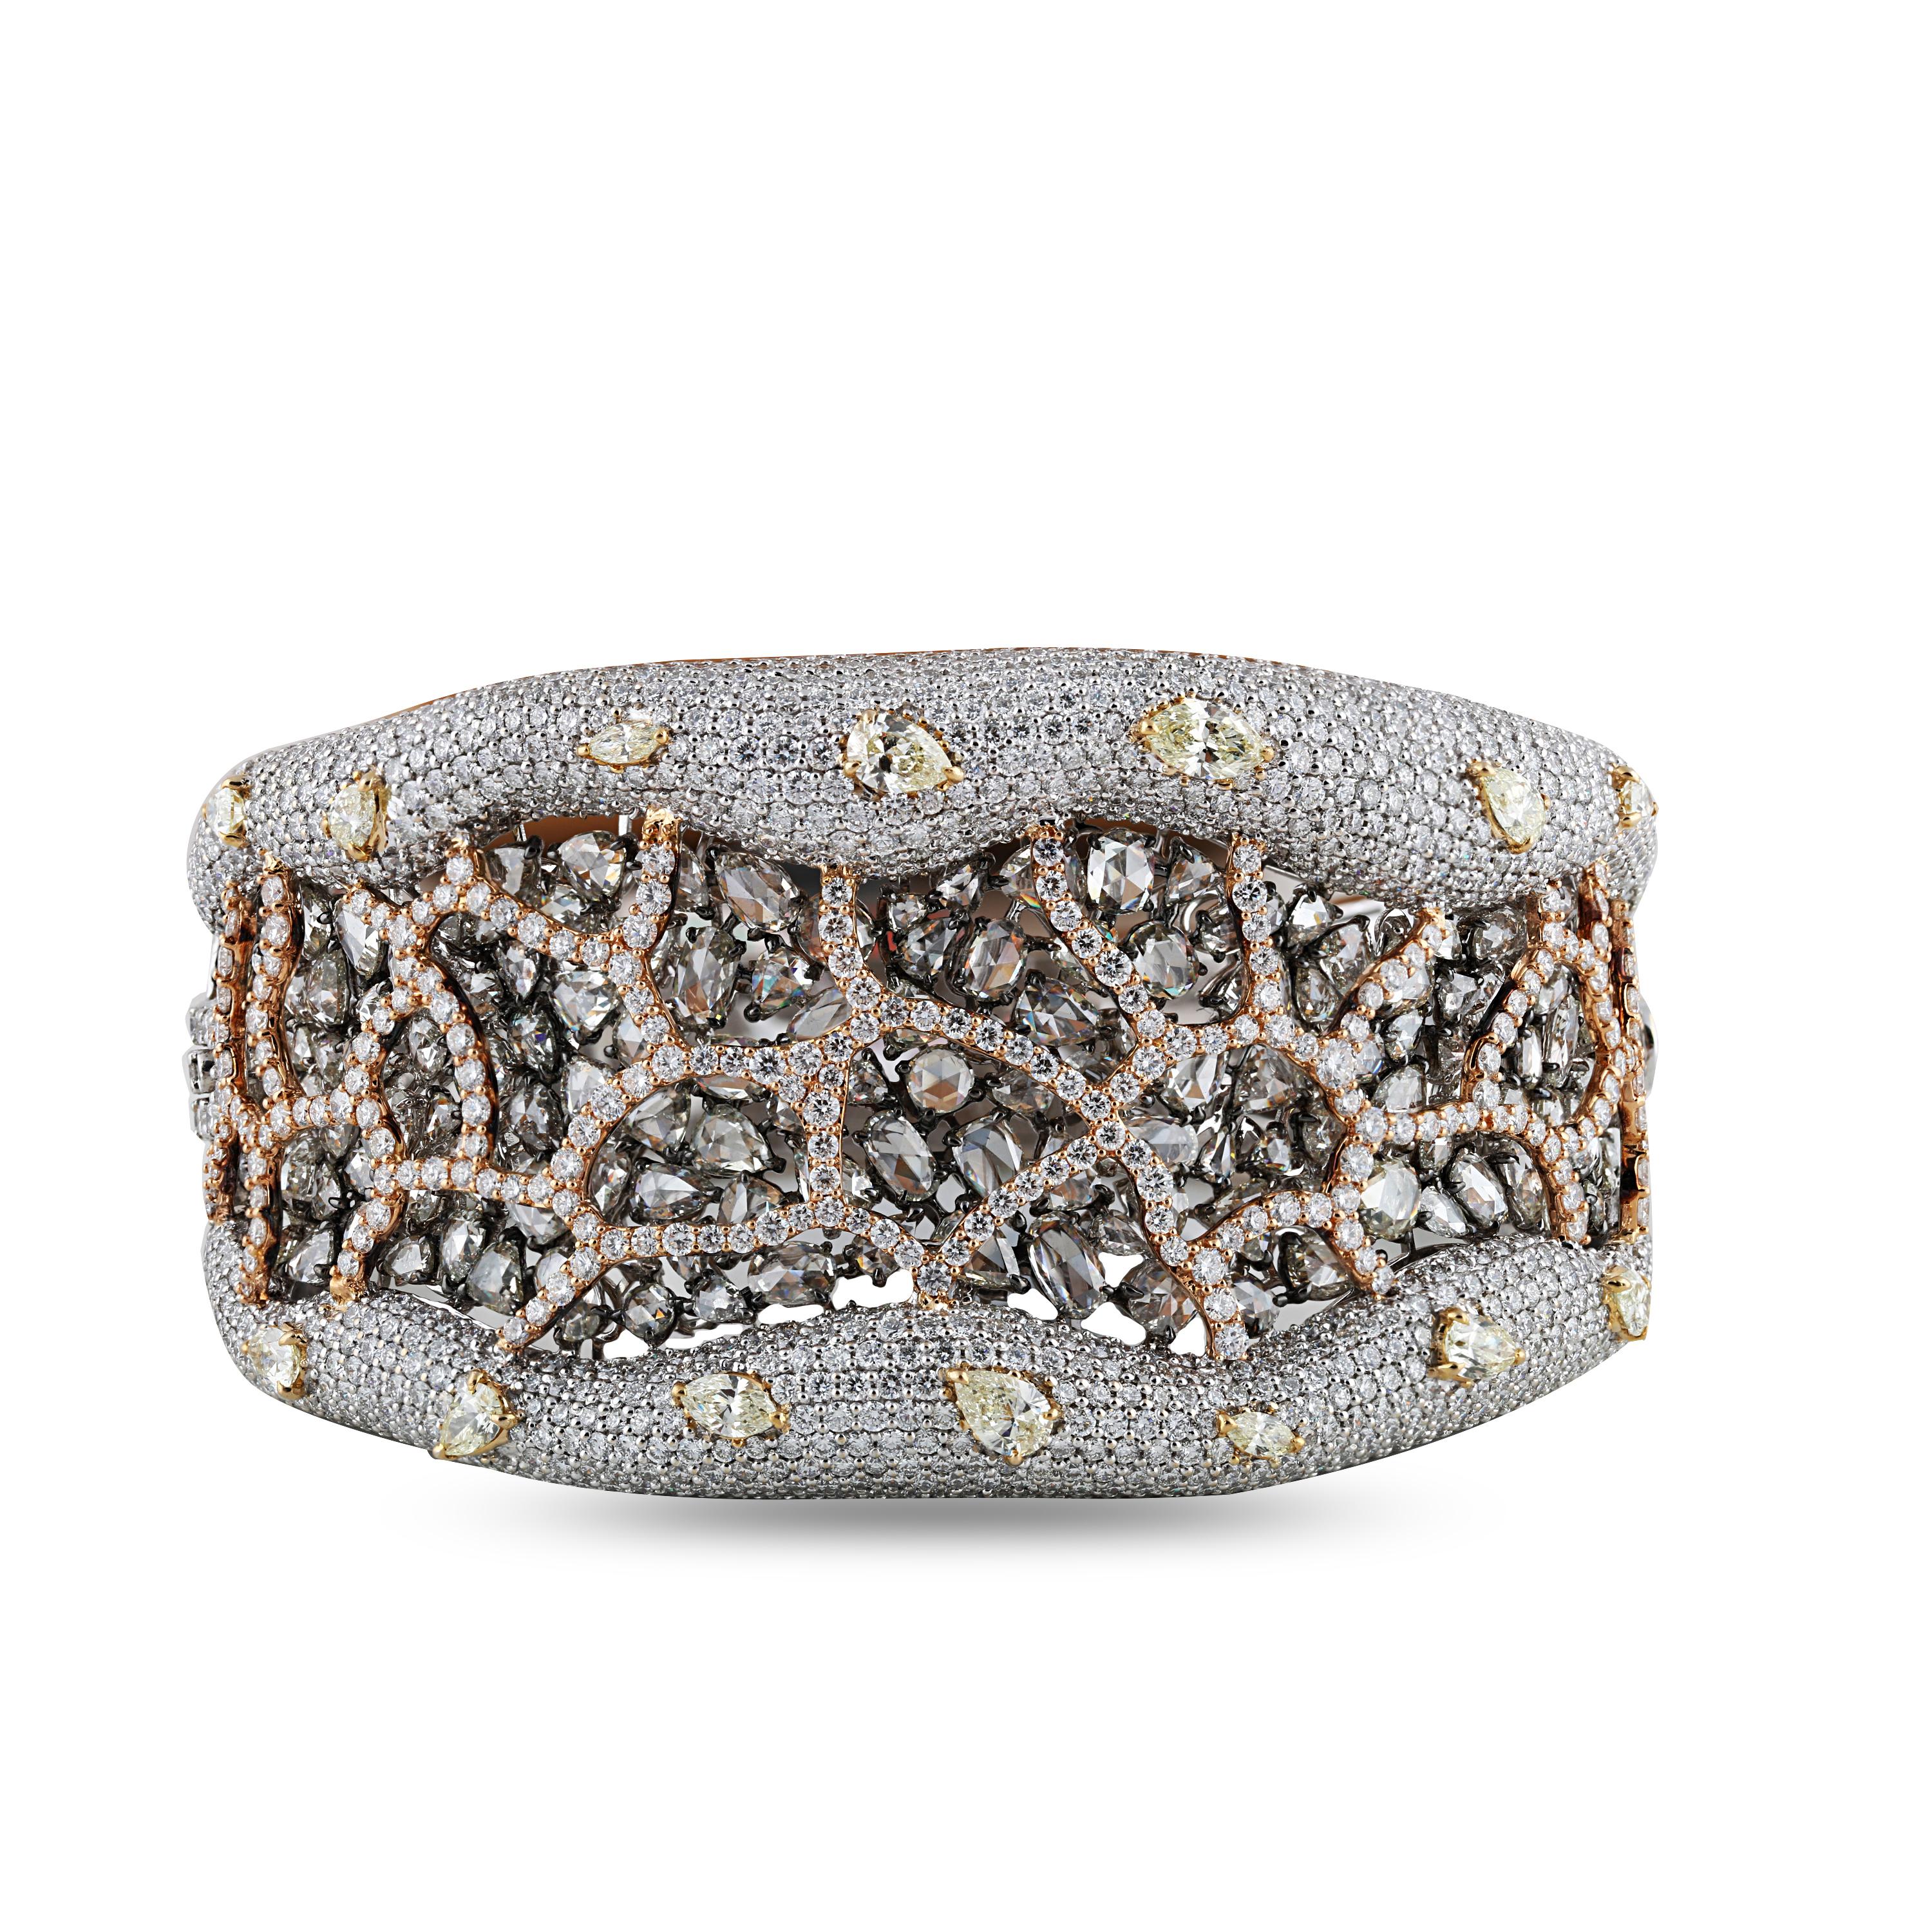 Brilliant cut and Rosecut diamond bracelet

The unconventional asymmetrical approach gives this broad diamond bracelet its standout quality. Composed of 1,613 brilliant cut and rose cut white and fancy yellow diamonds in brilliant cut and rosecut